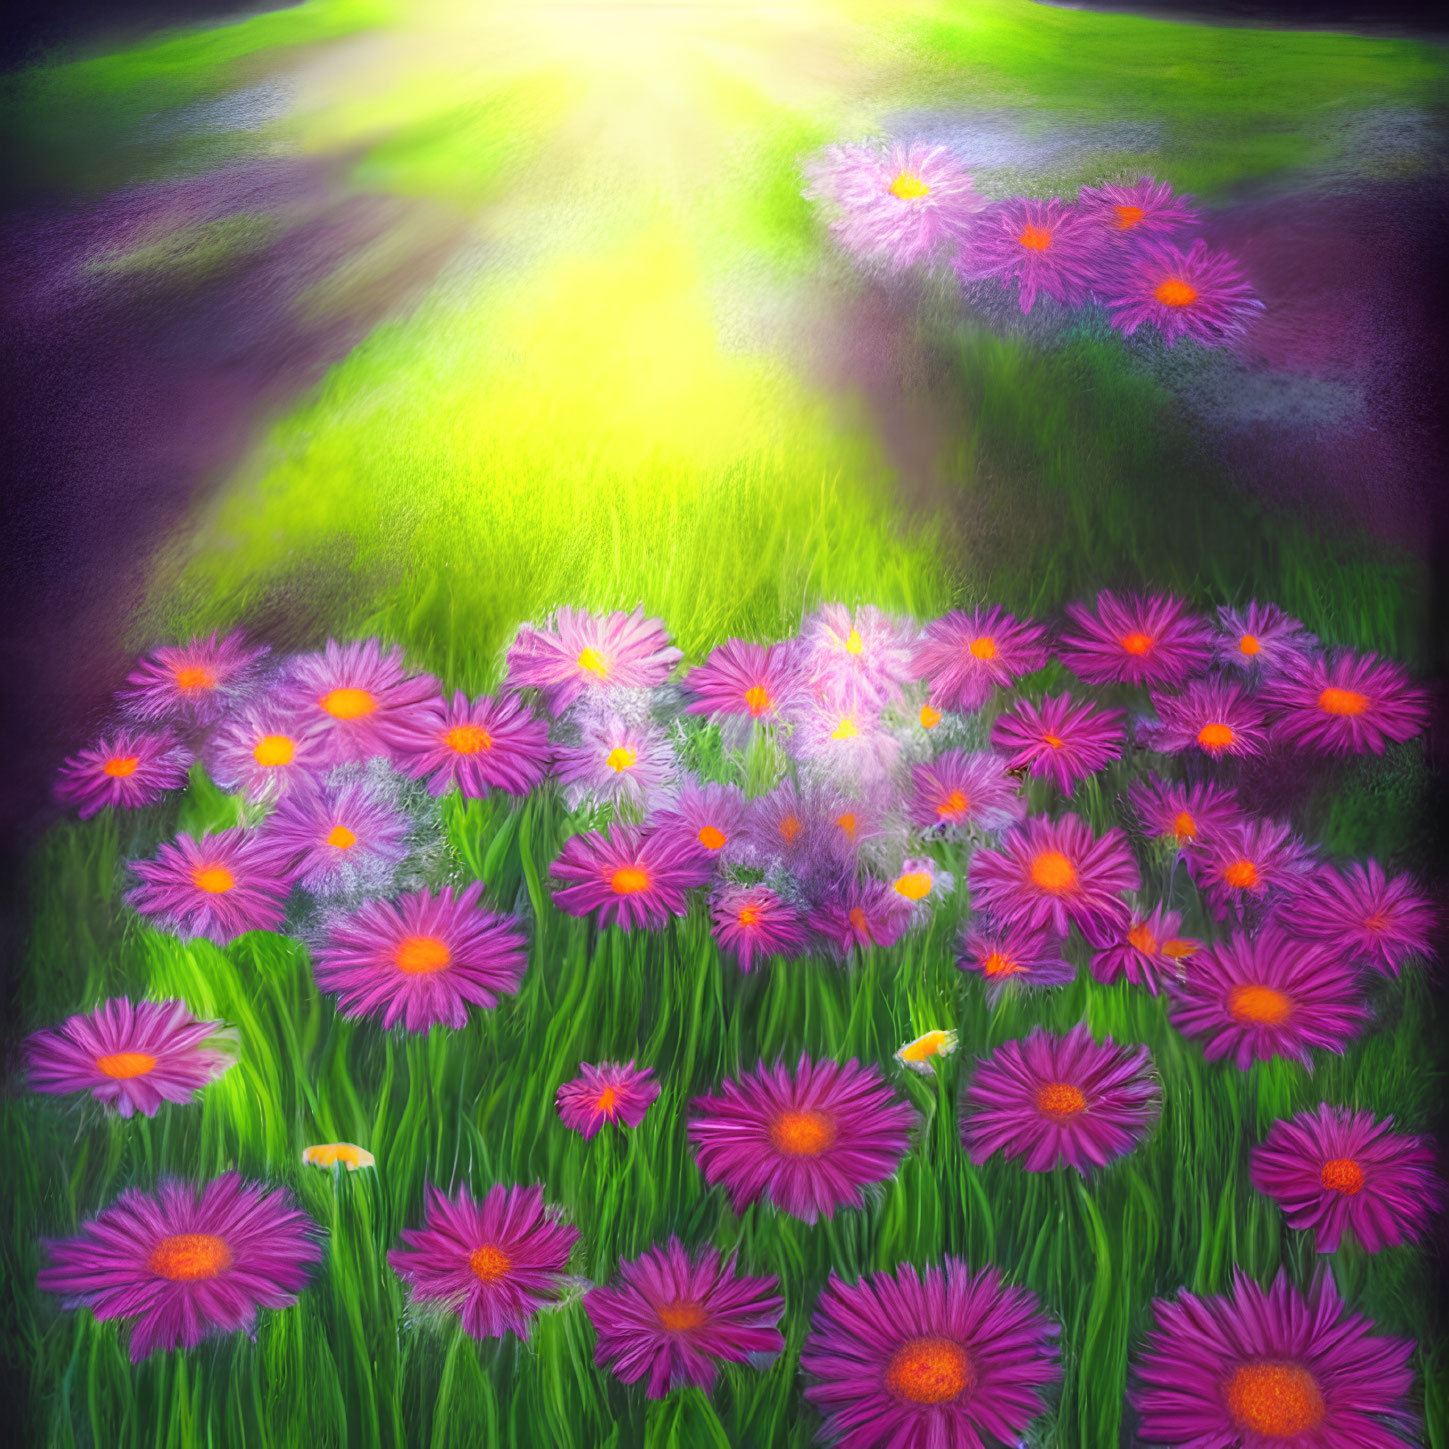 Vibrant pink and purple wildflower field in sunlight